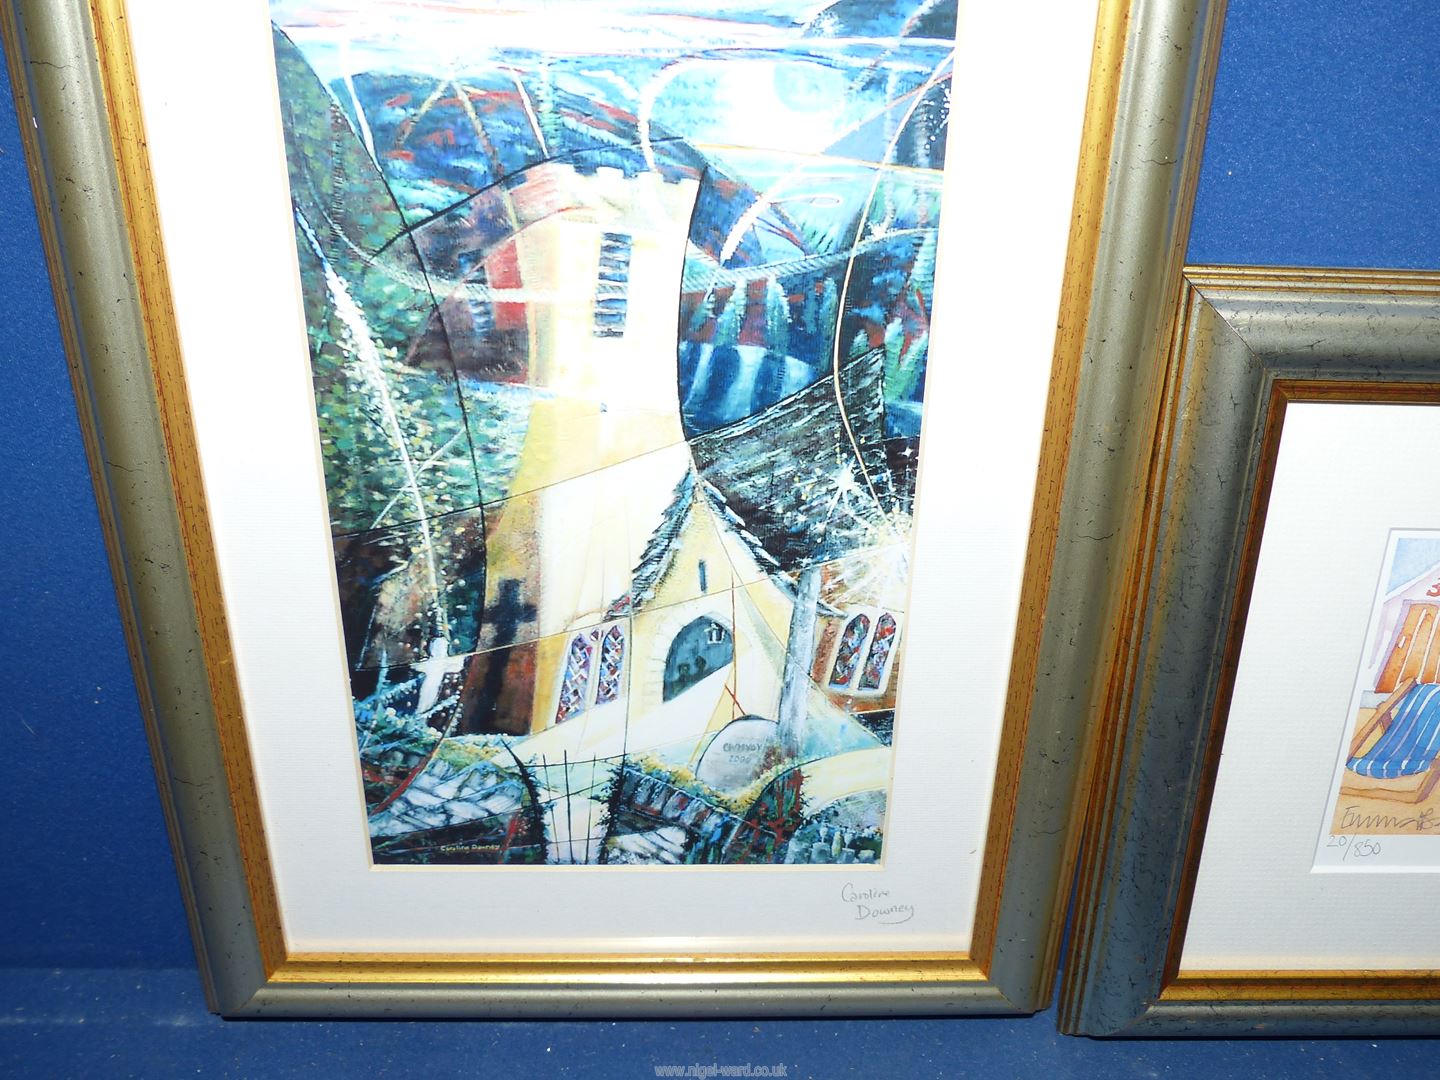 A framed and mounted Print of Cwmyoy Church by Caroline Downey and a Limited Edition Print (no. - Image 3 of 3